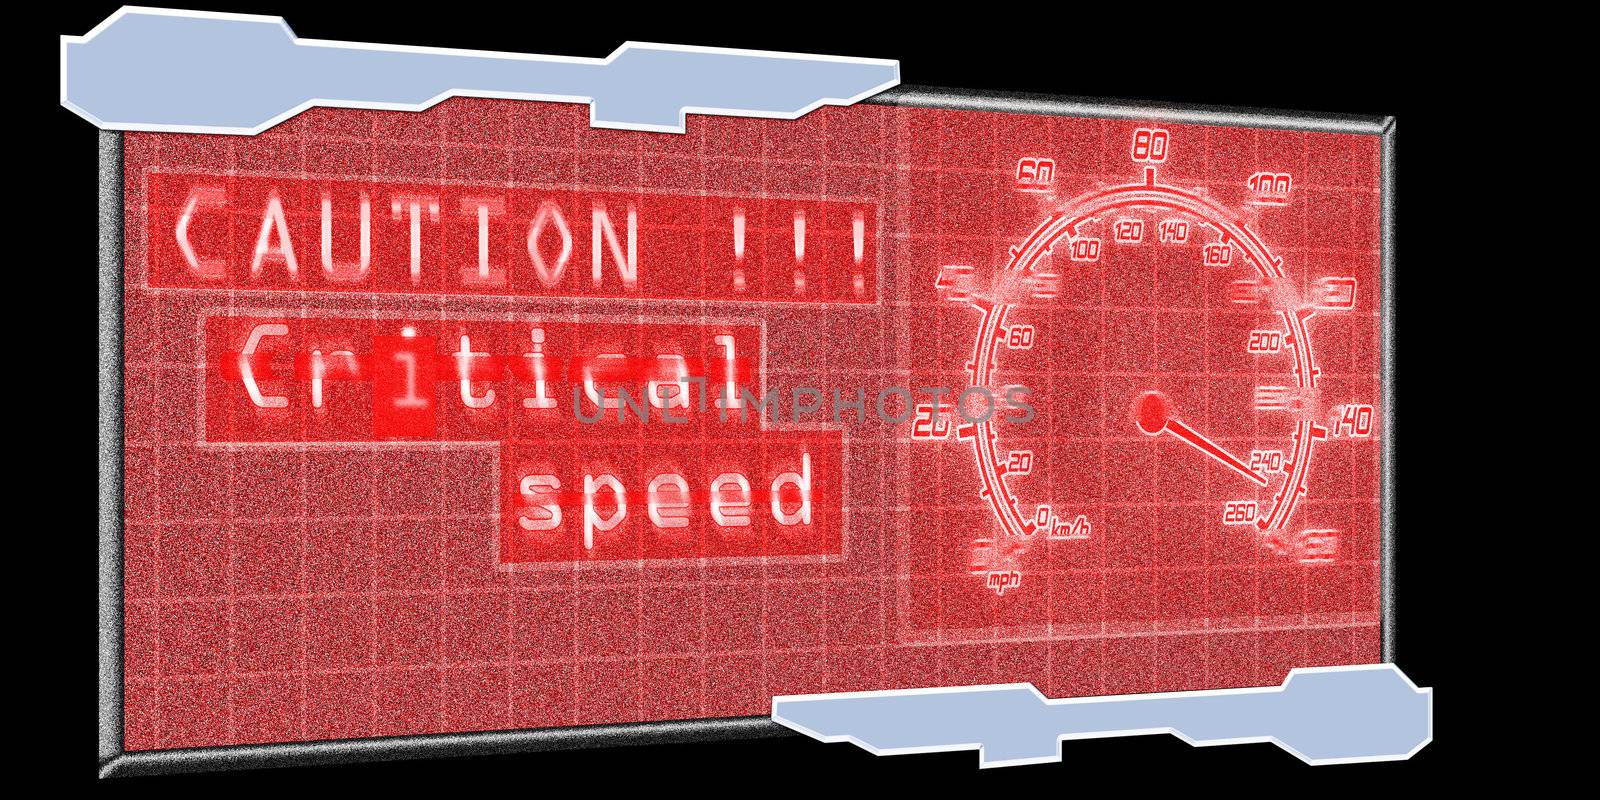 caution critical speed by Spartacus